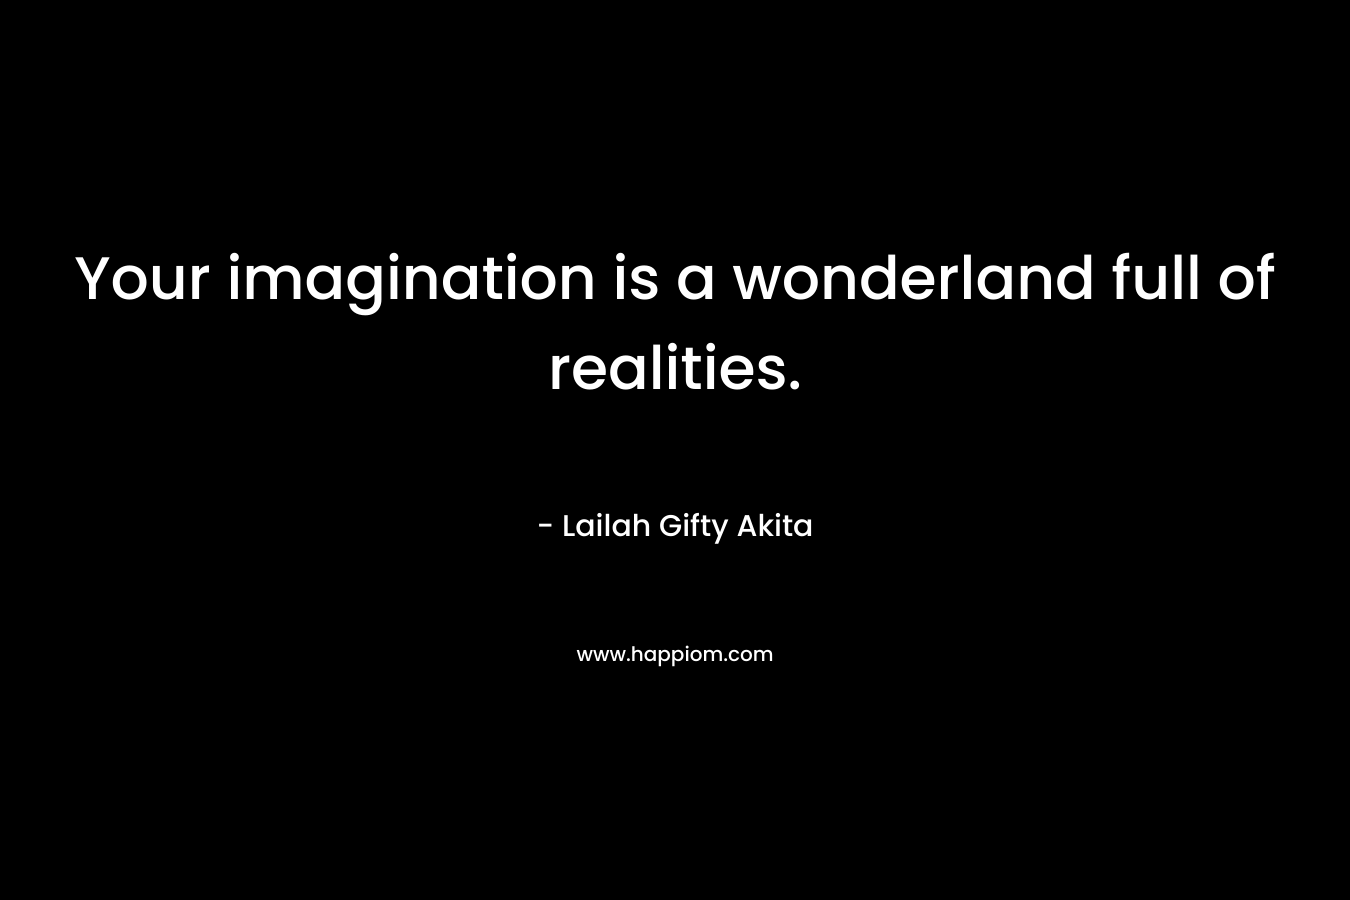 Your imagination is a wonderland full of realities.